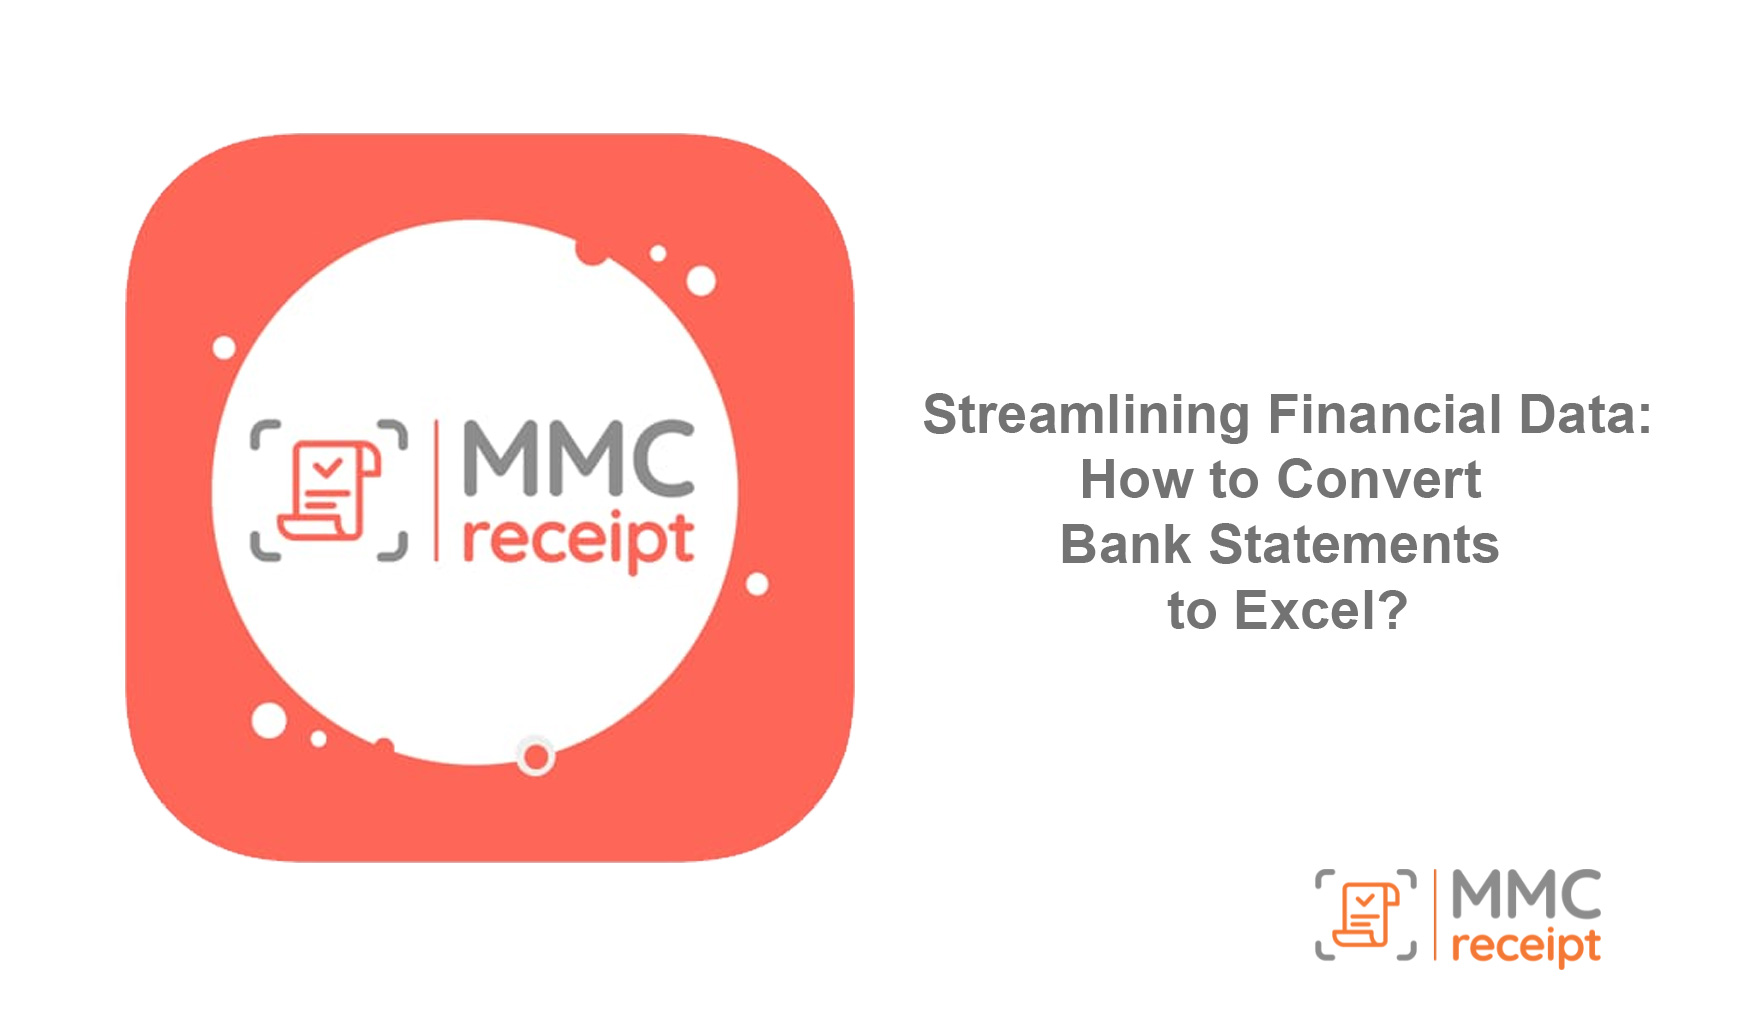 Streamlining Financial Data:How to Convert Bank Statements to Excel?